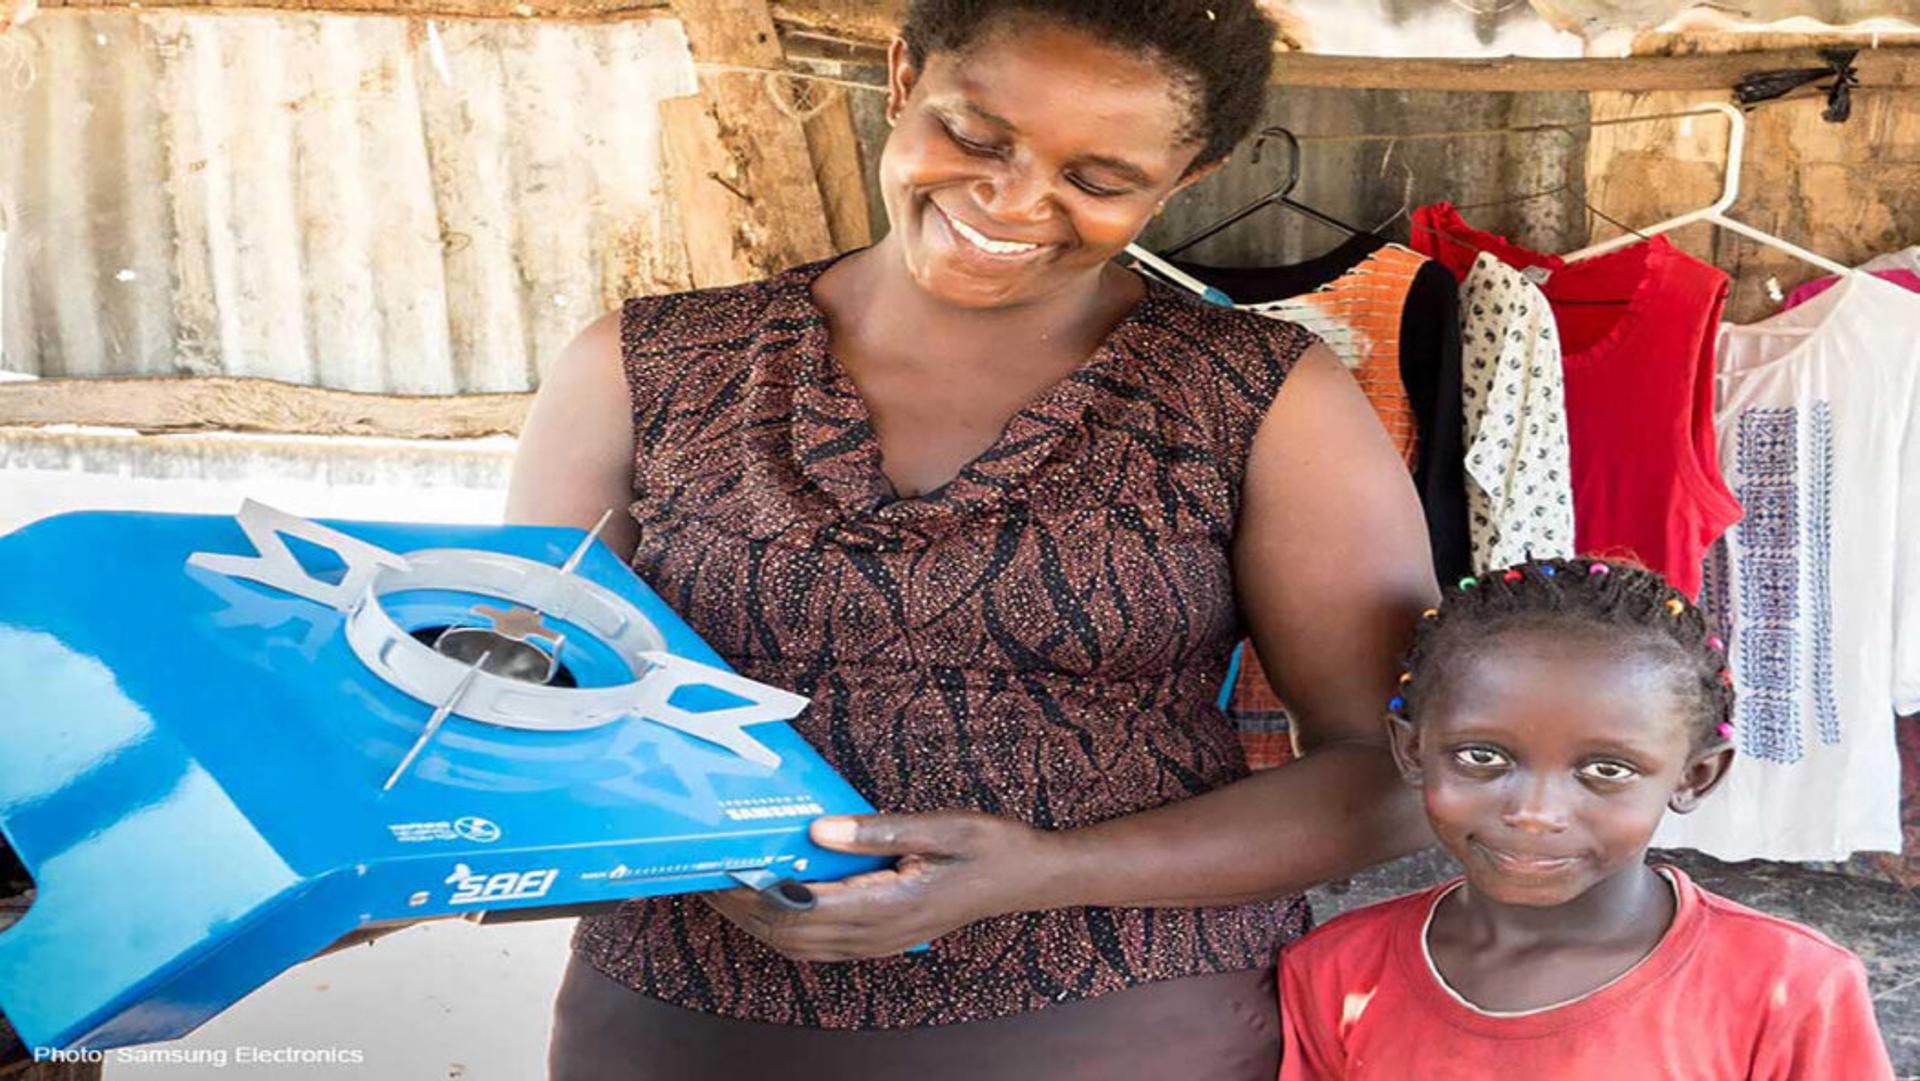 Woman next to a child holding a blue single burner bioethanol stove